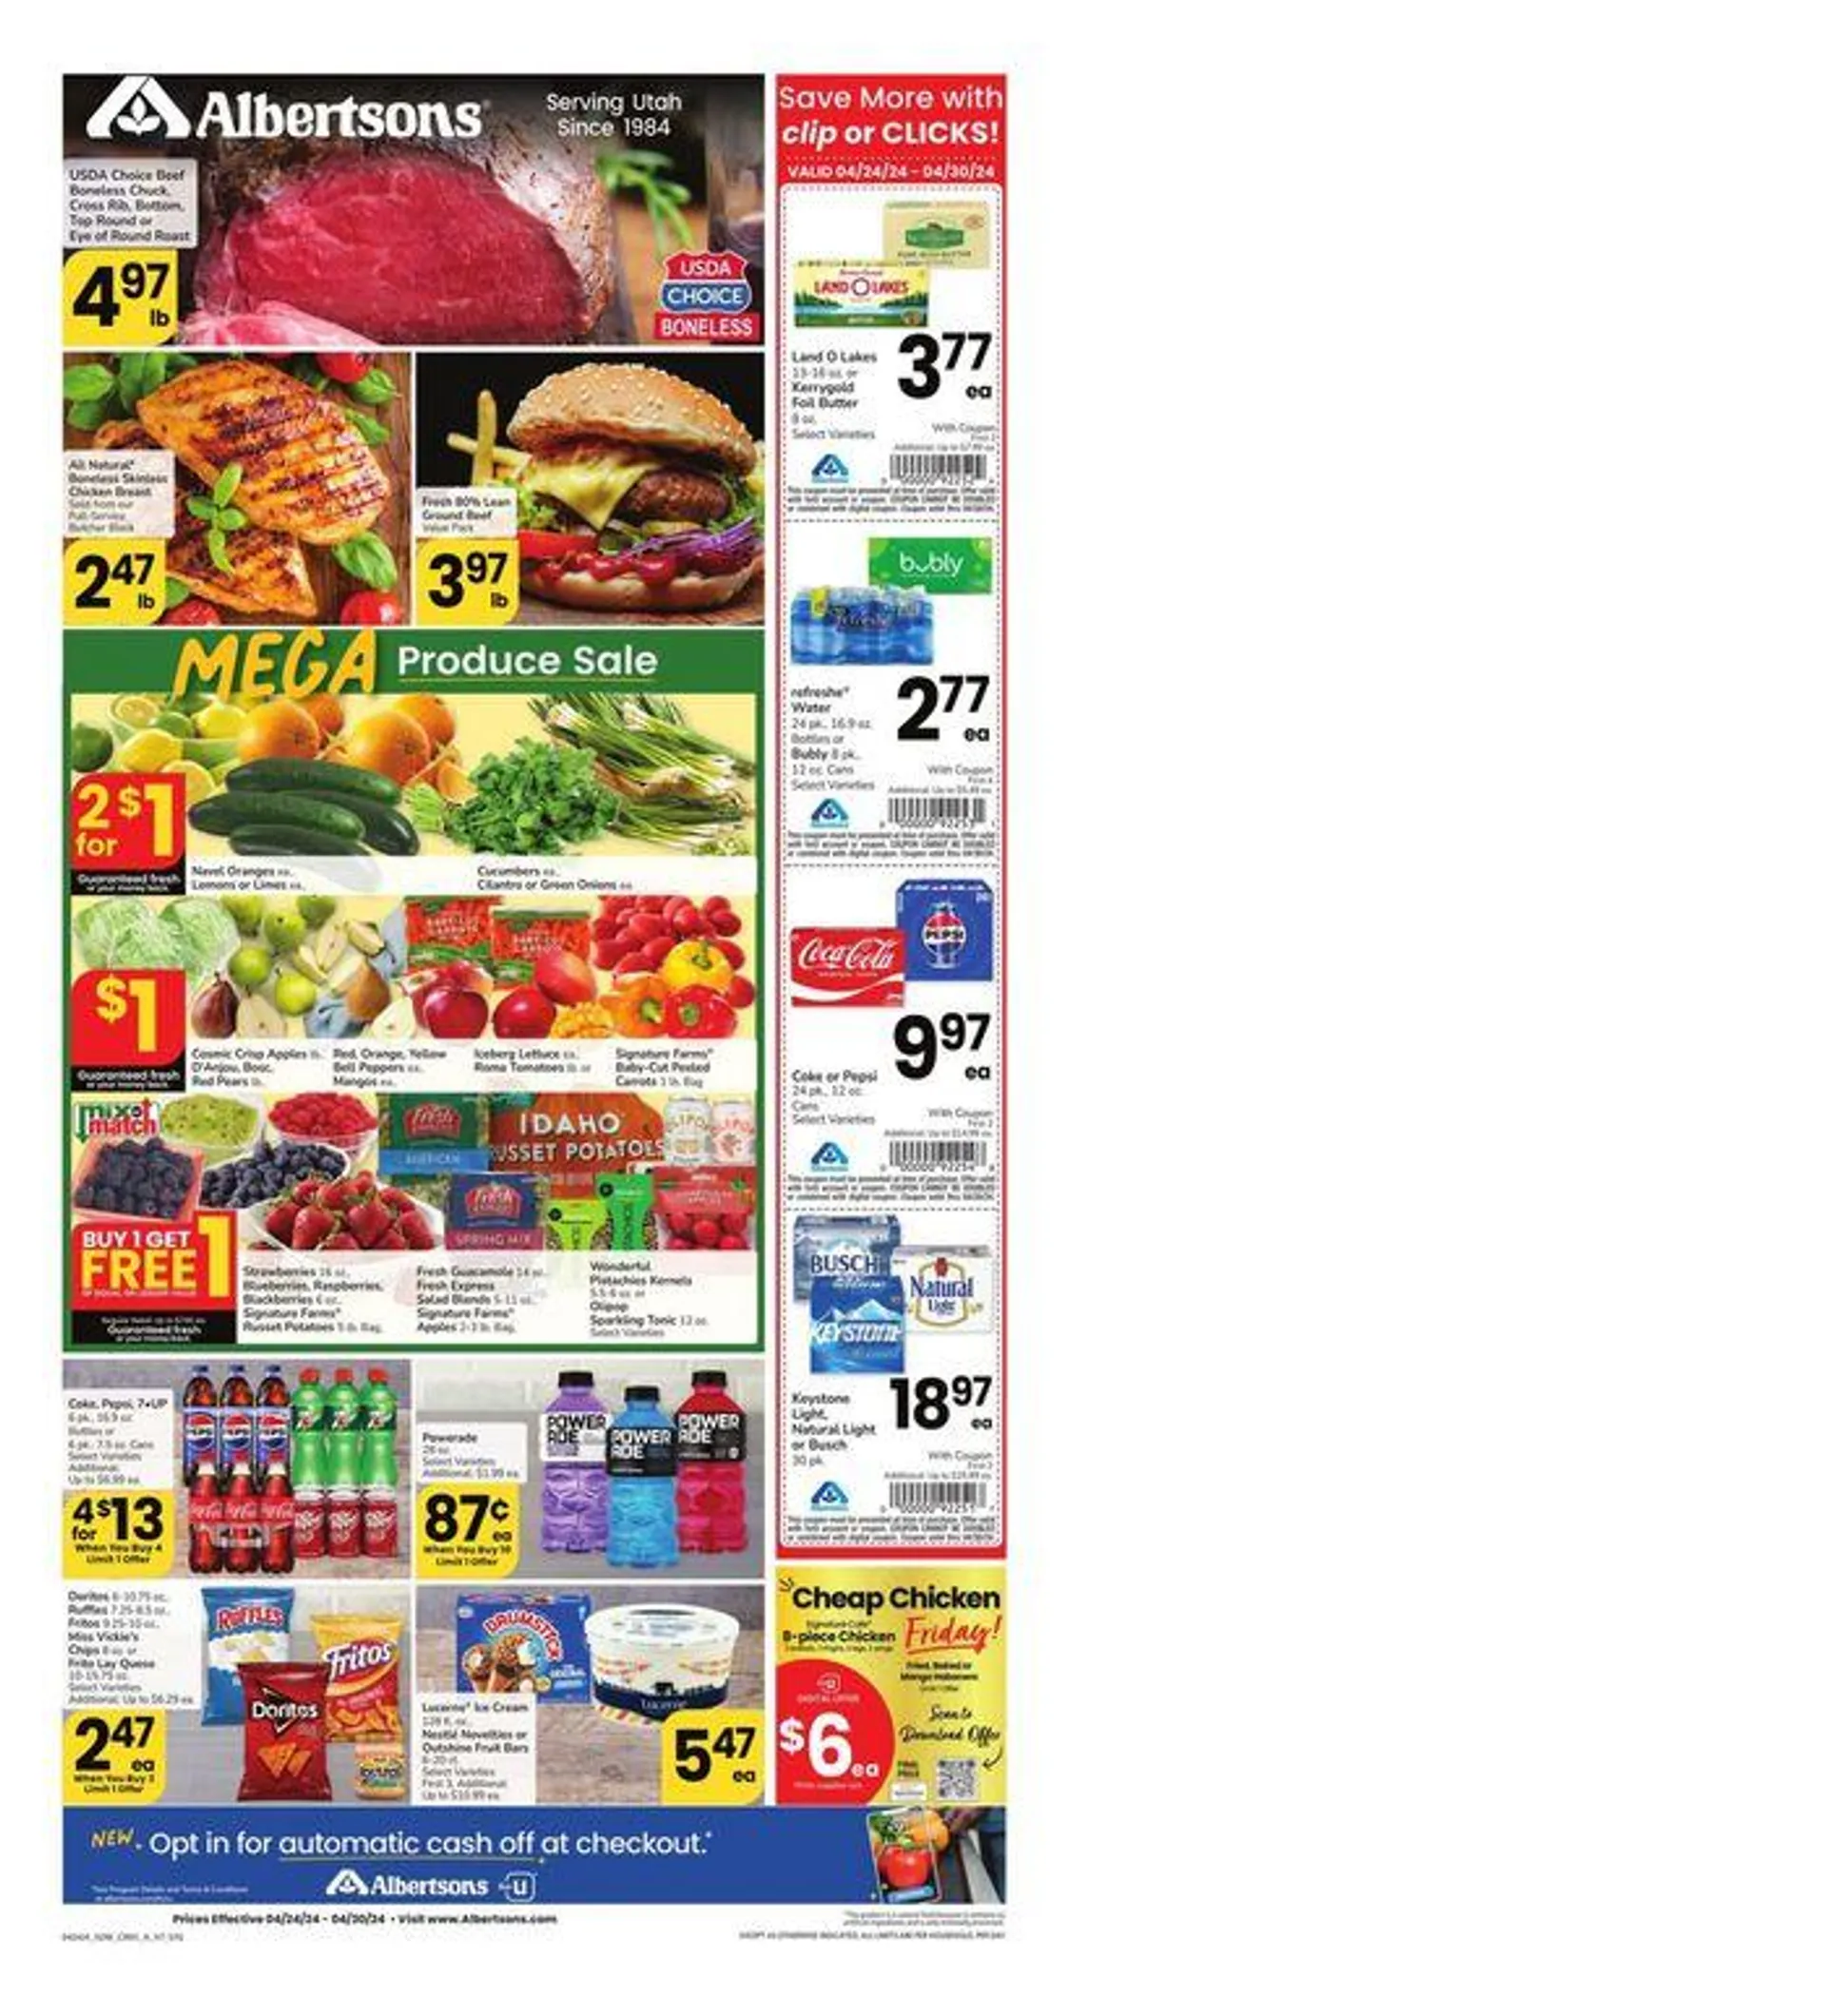 Weekly Ad - Albertsons - Southwest - 1